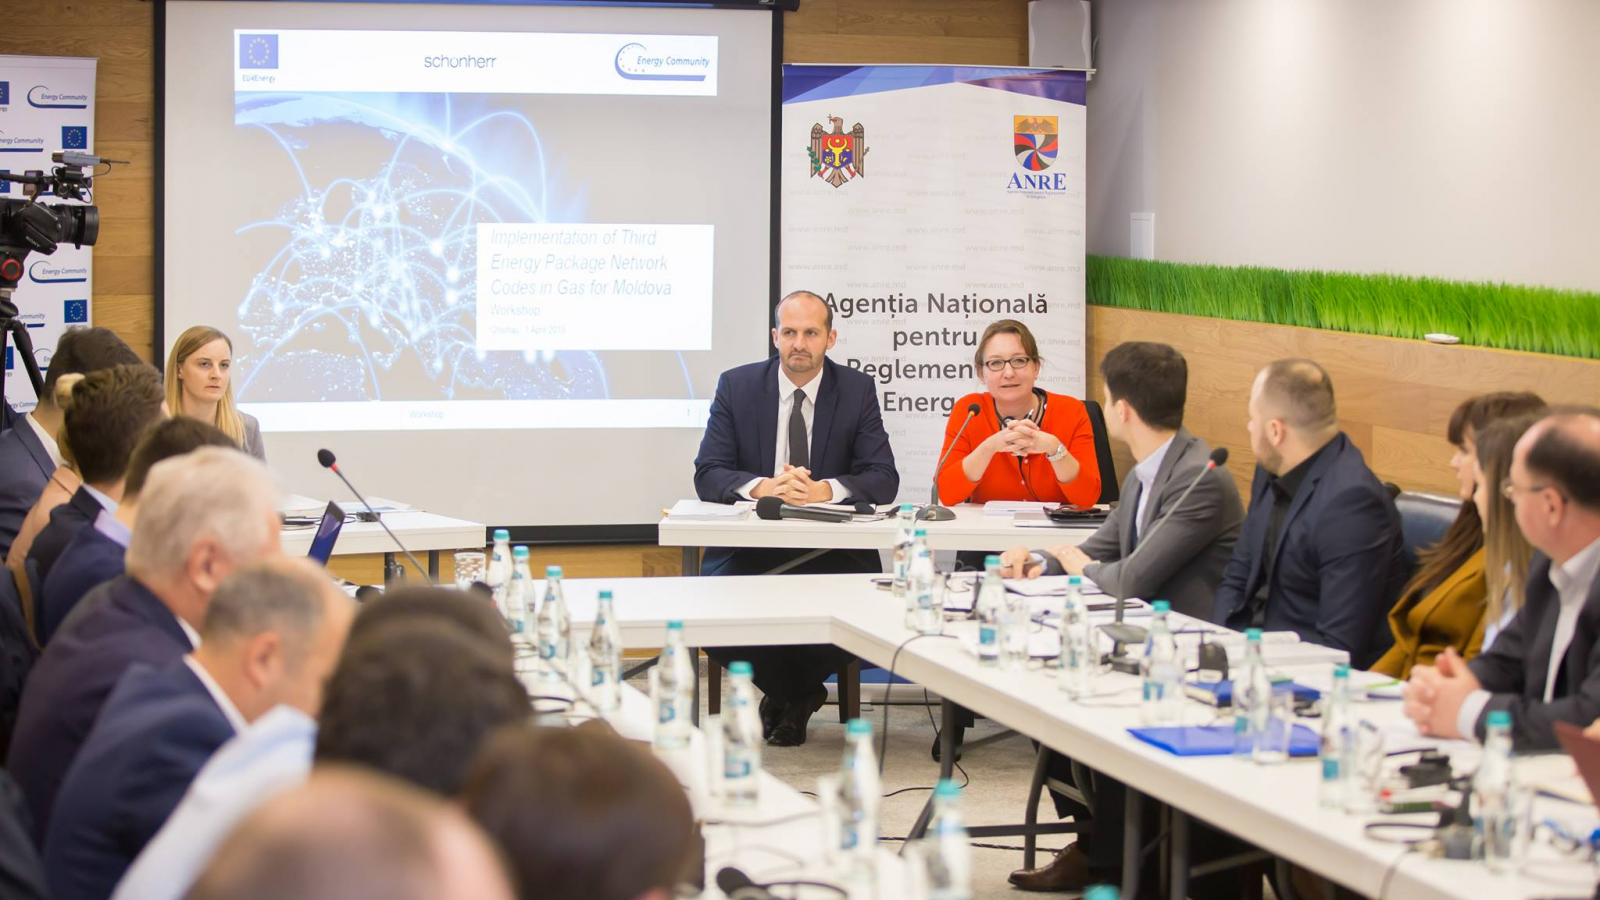 EU4Energy supports transposition of gas network codes in Moldova